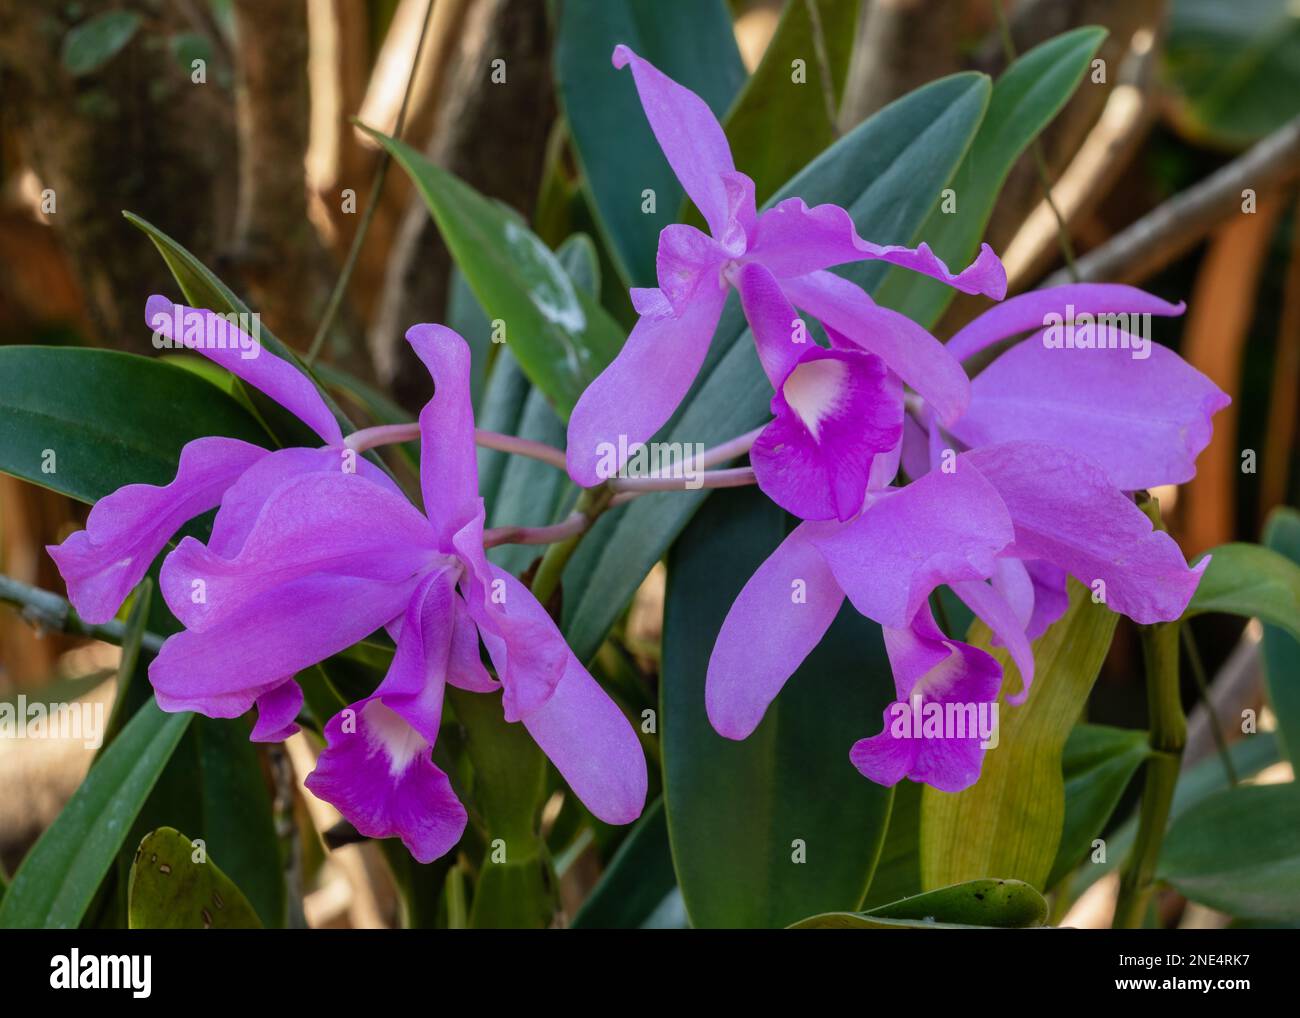 Closeup view of bright purple and white flowers of cattleya orchid hybrid blooming outdoors on natural background Stock Photo